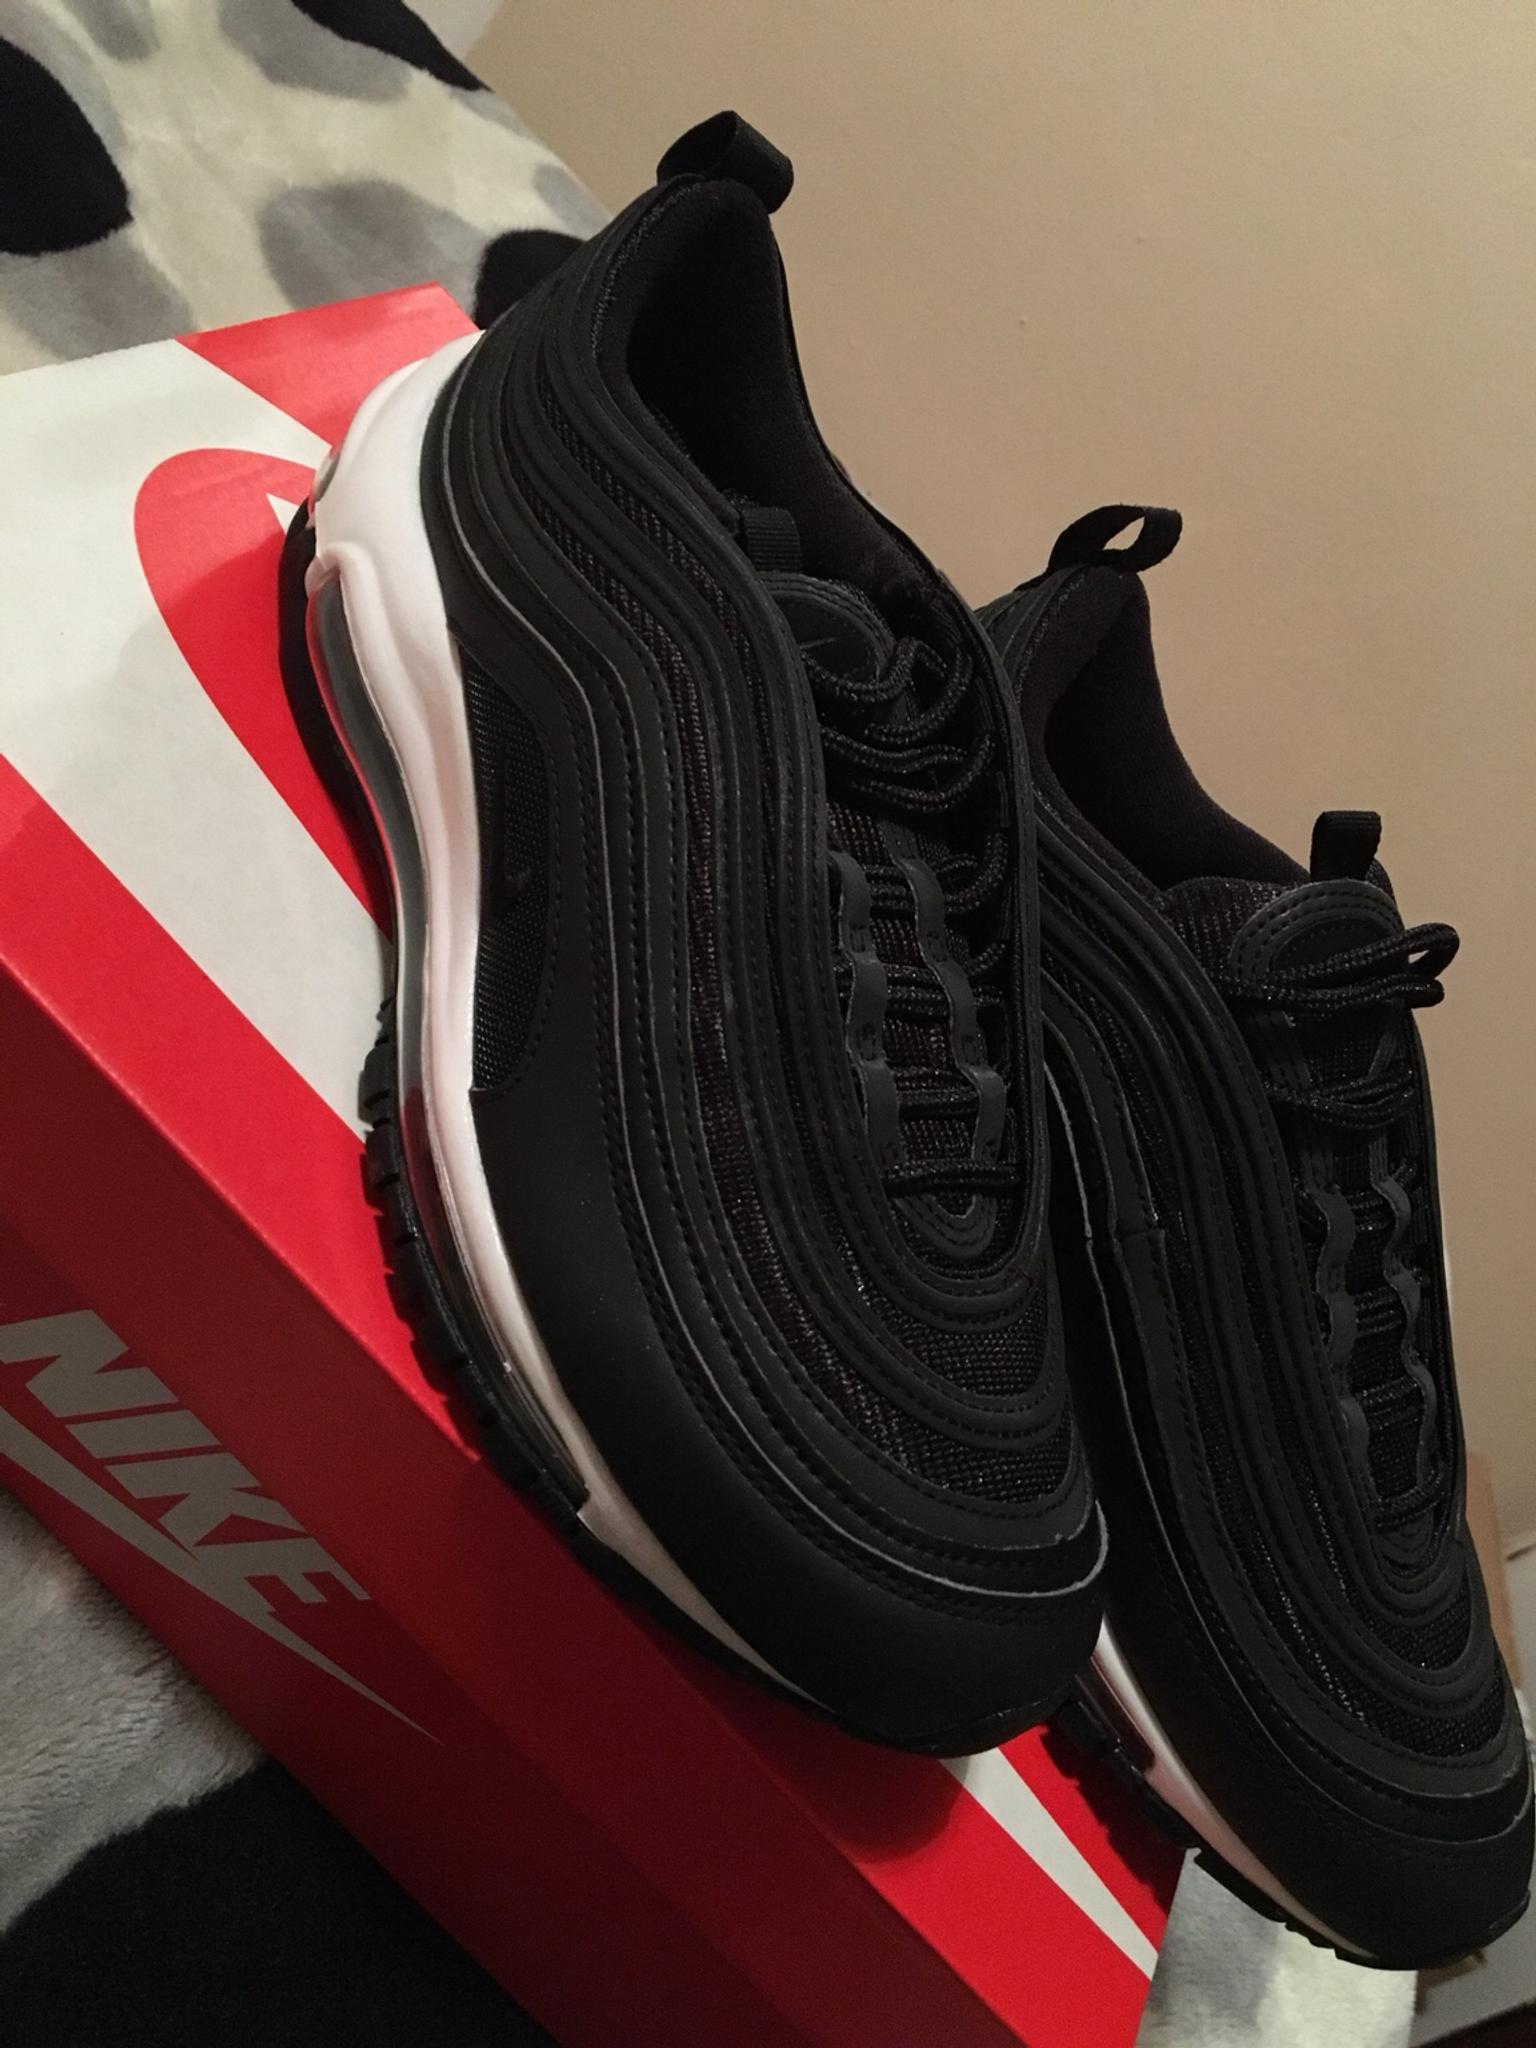 undefeated x air max 97 Tumblr